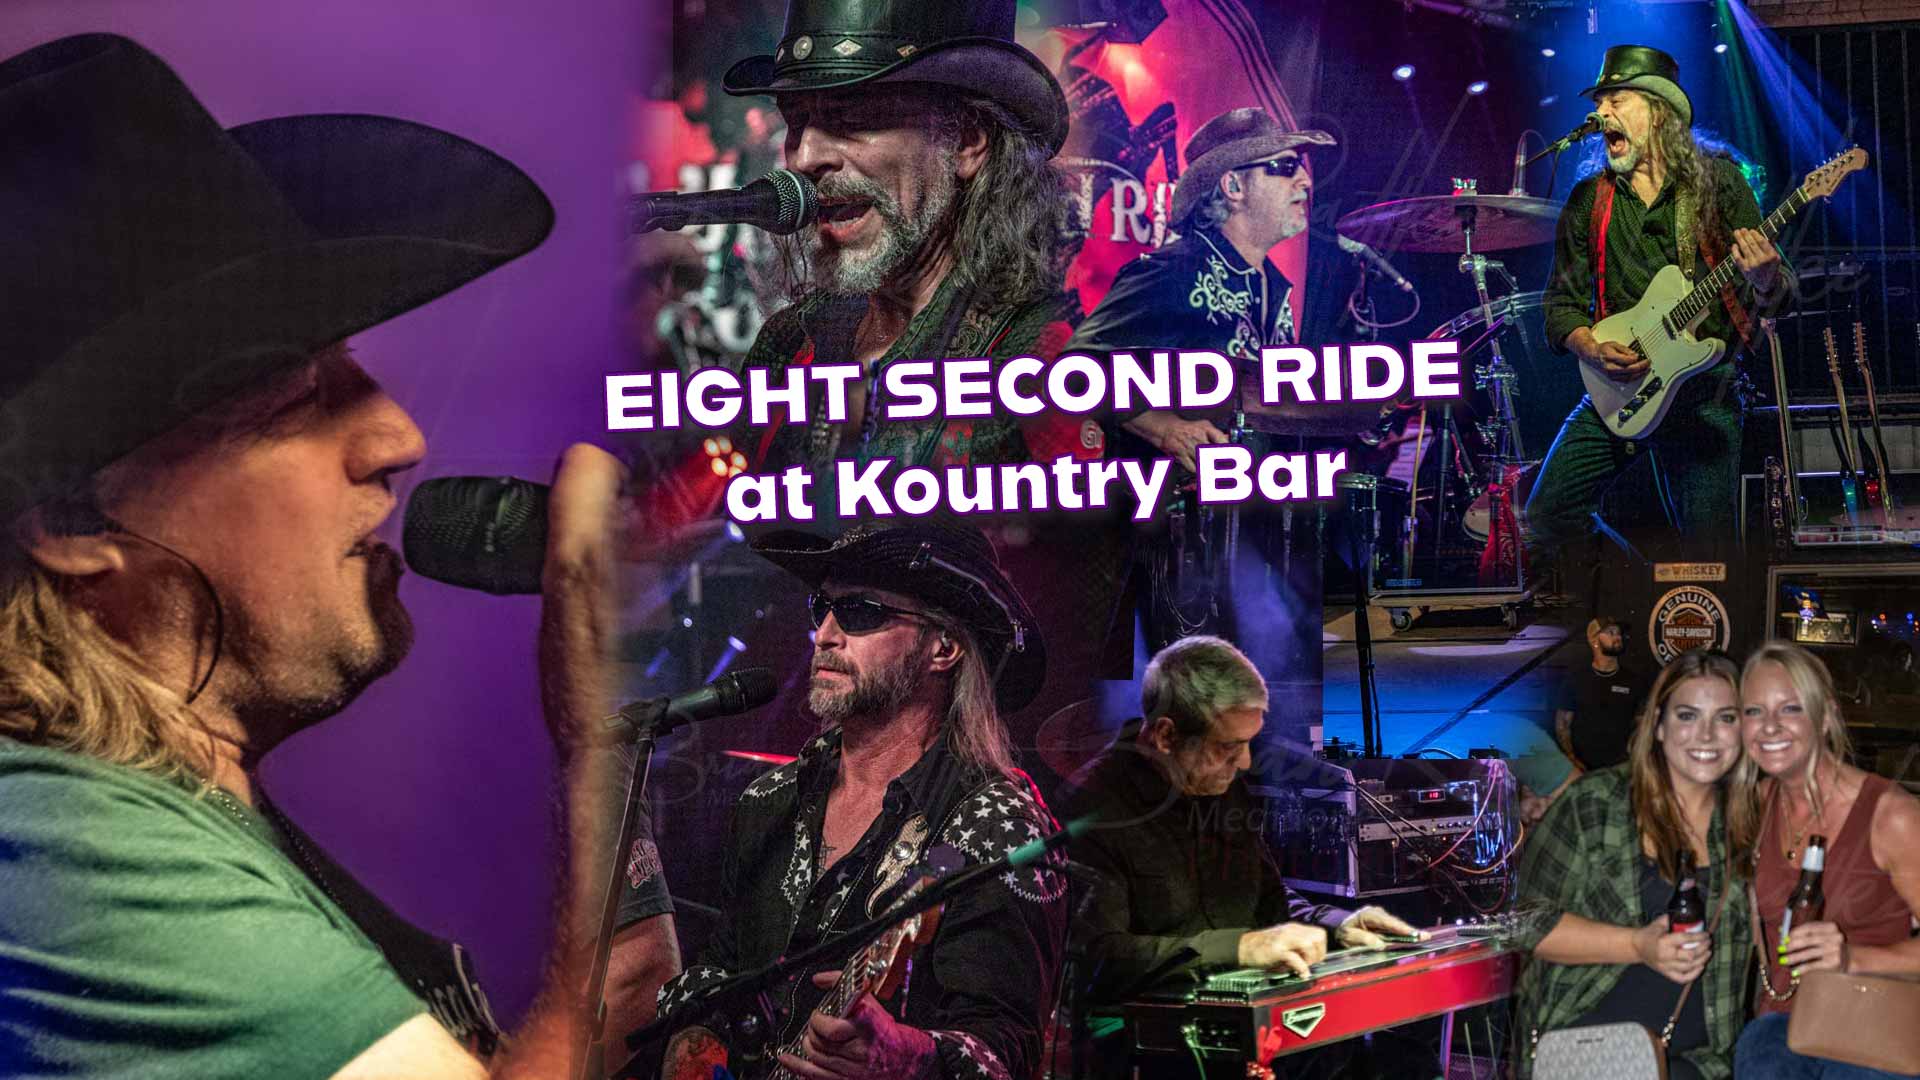 Eight Second Ride band in Concert at Kountry Bar in Appleton WI